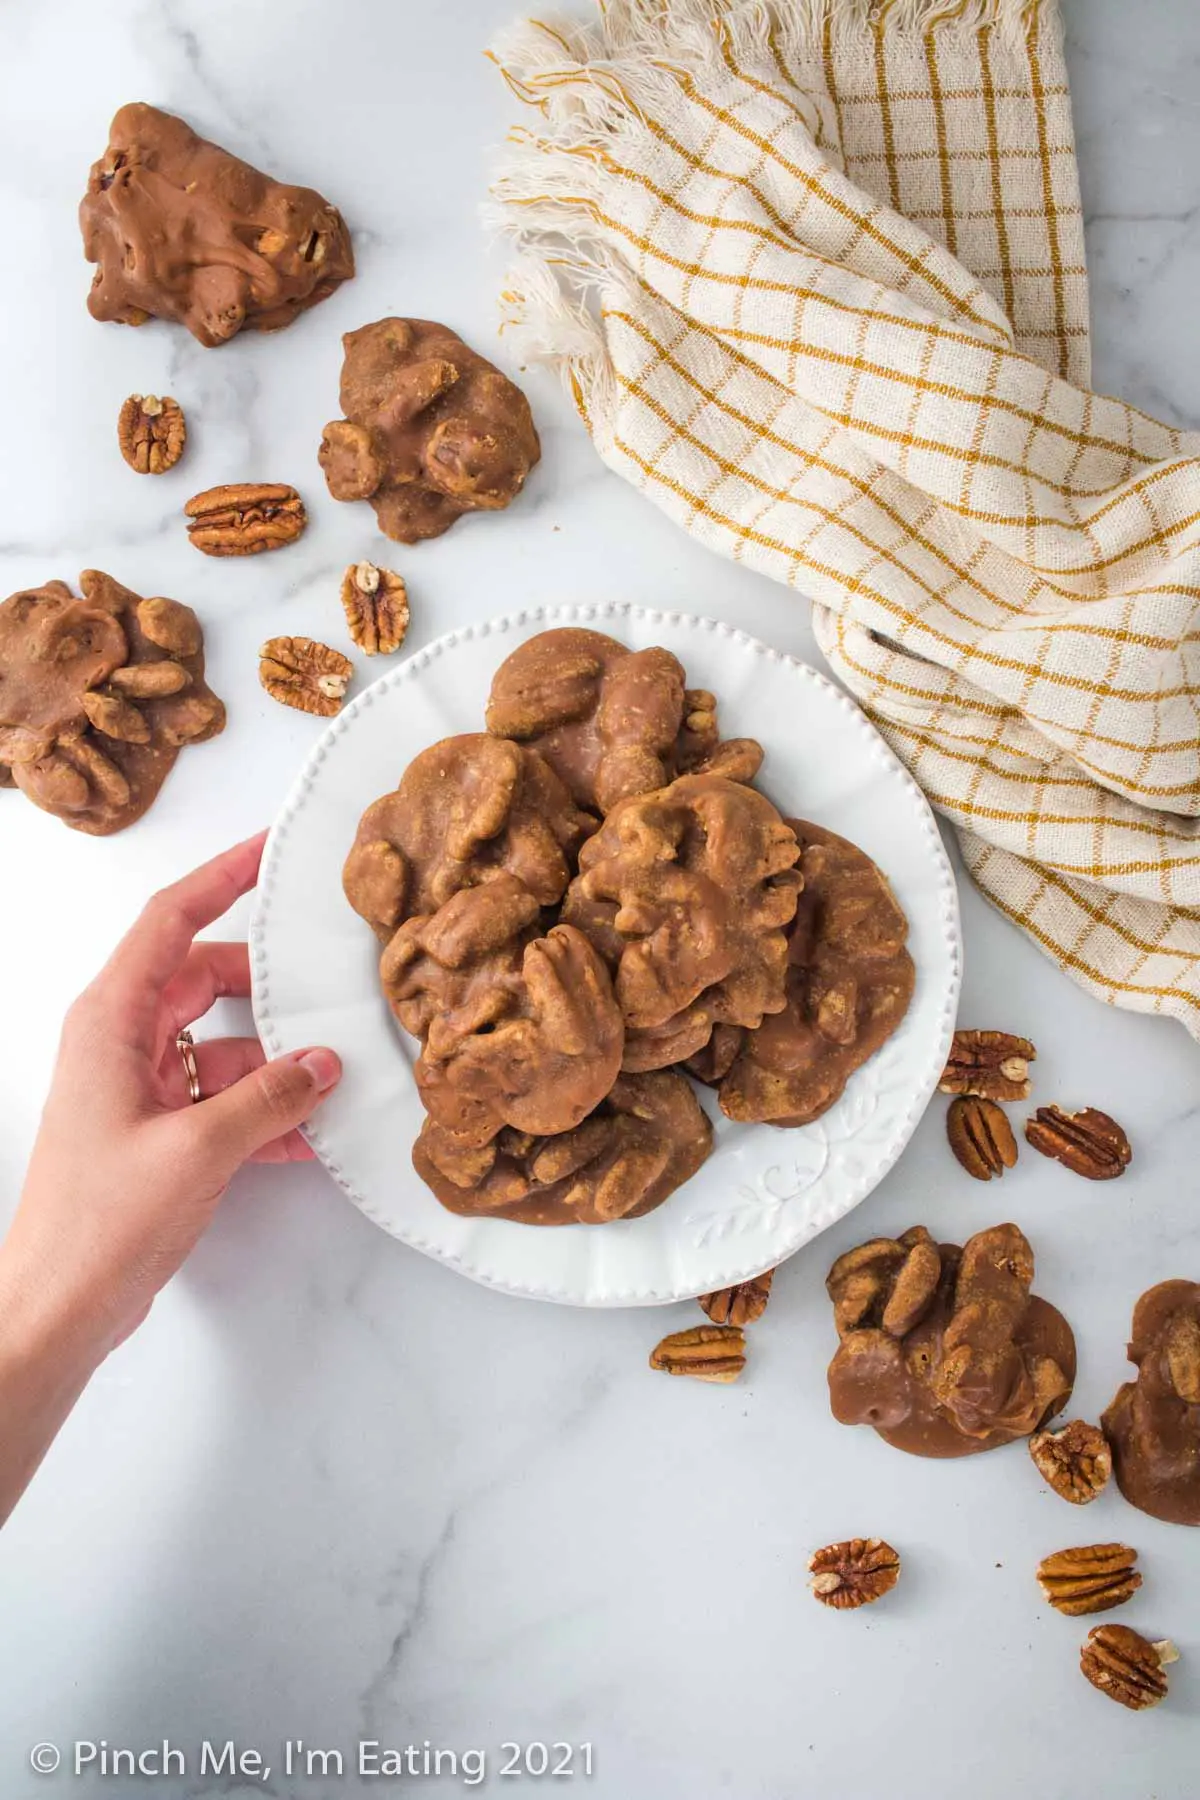 Overhead view of Southern pecan pralines on a white plate on a marble background. A hand is holding the plate, and pralines and pecans are scattered on the table around the plate.